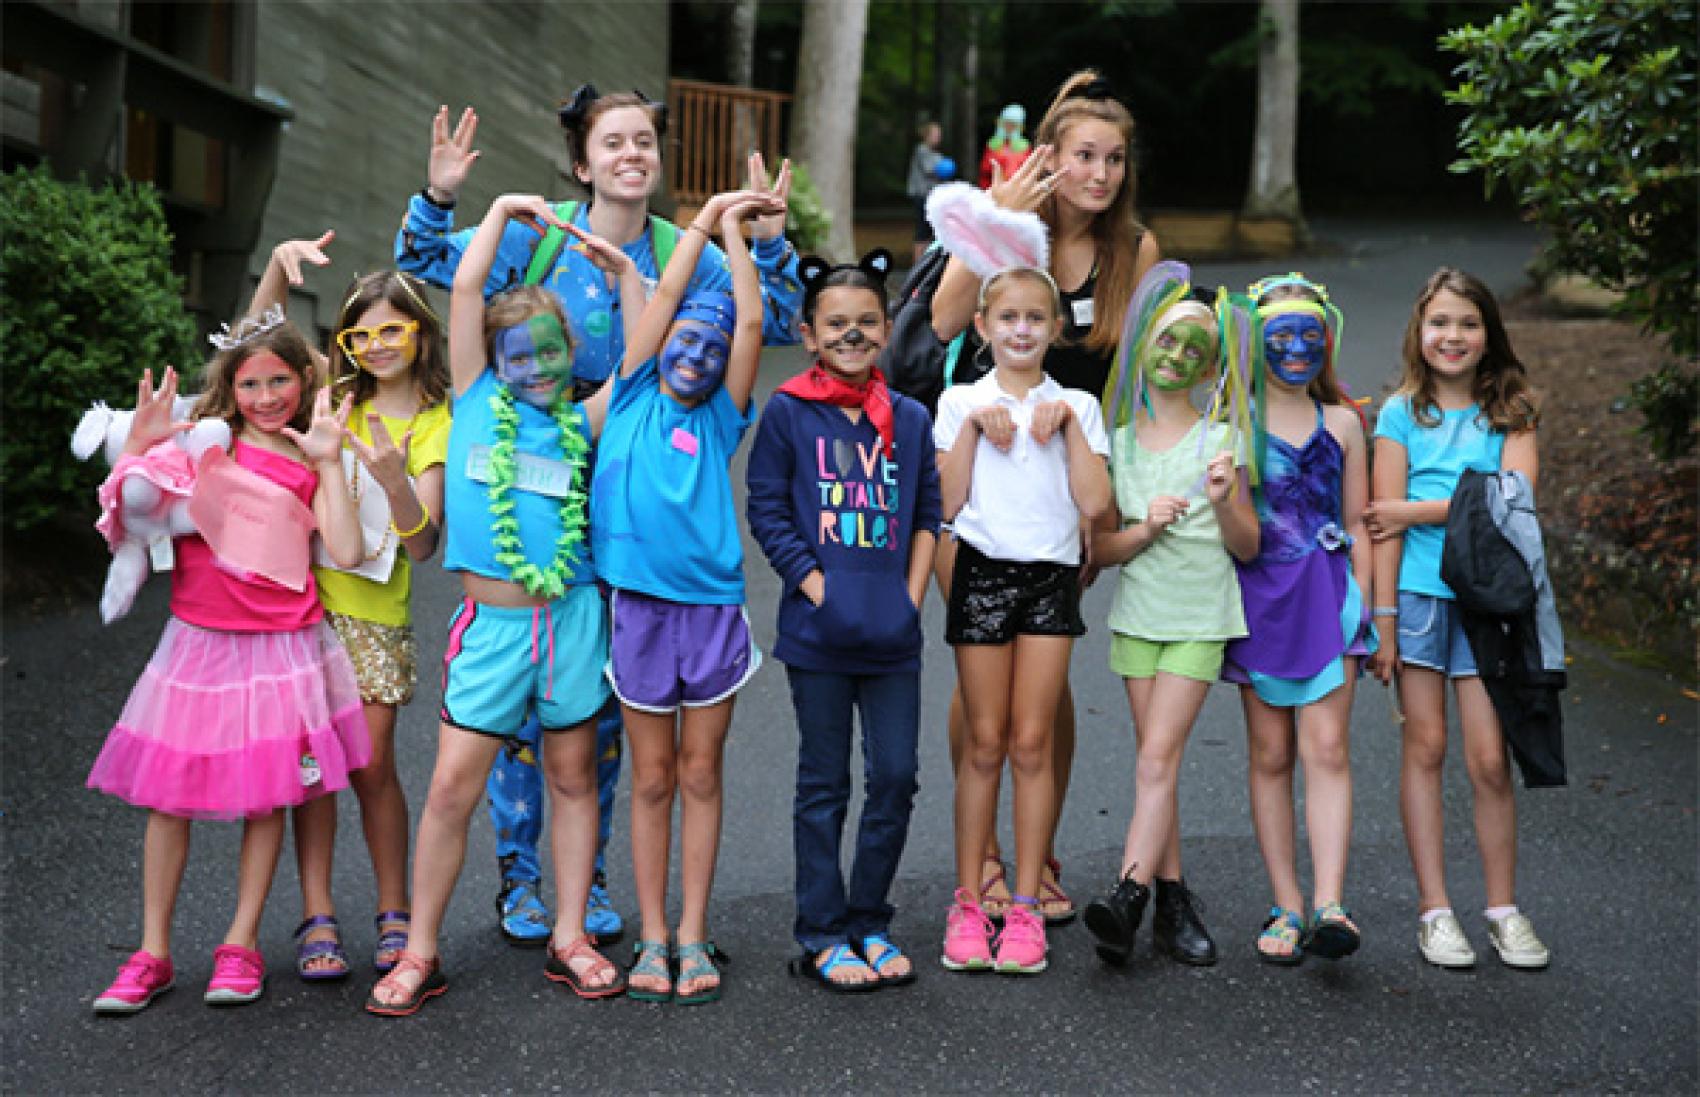 Campers and staff dressed in costume